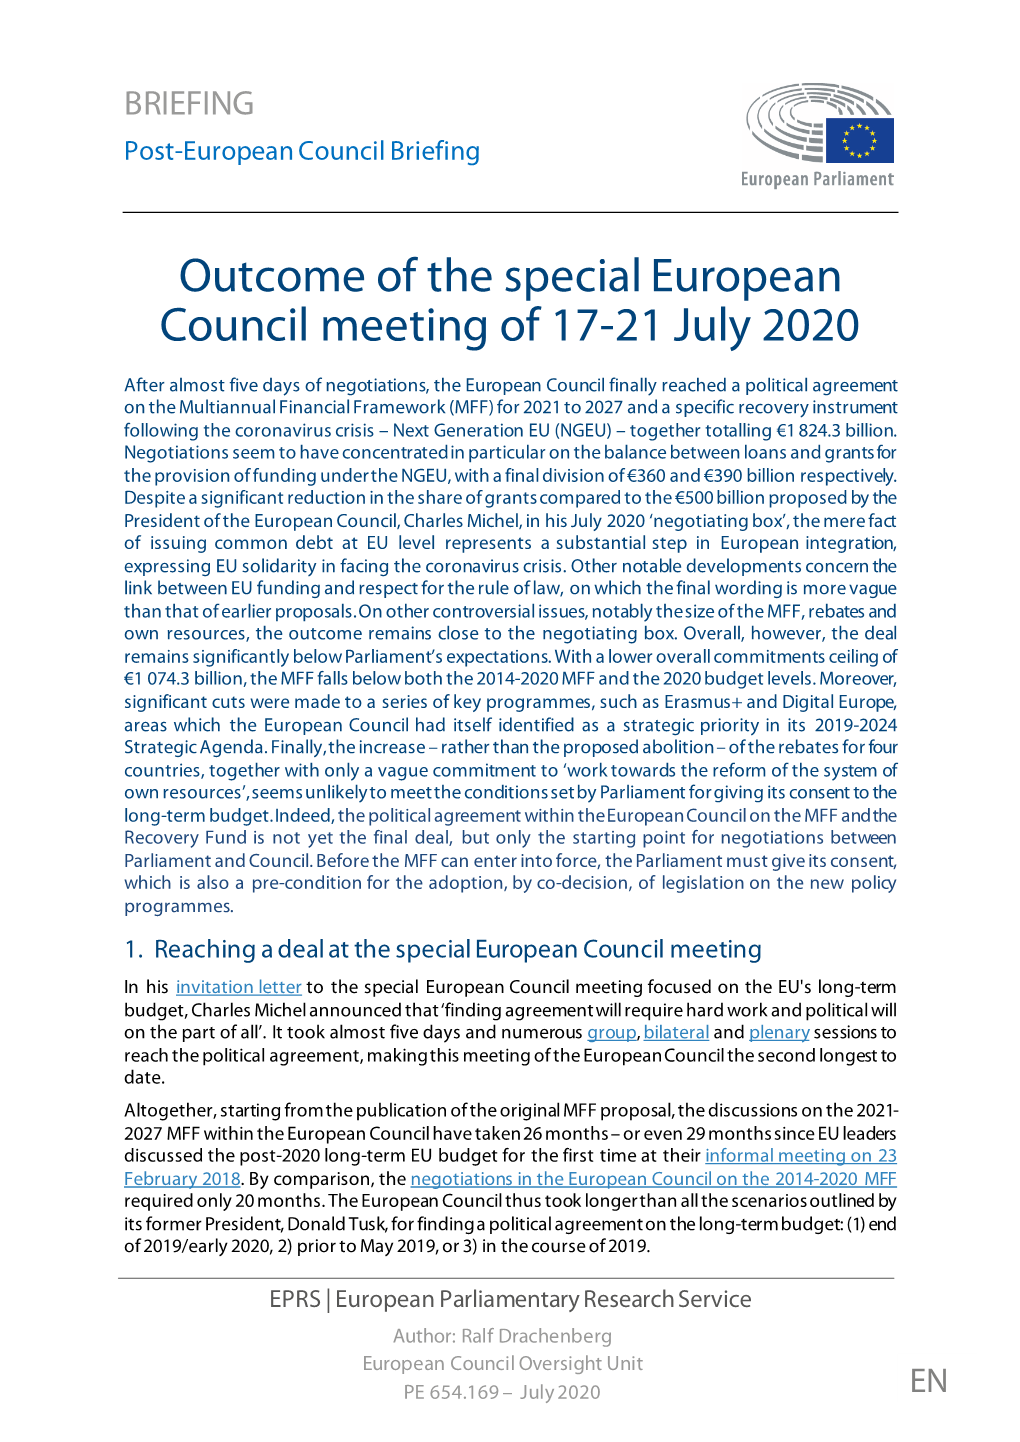 Outcome of the Special European Council Meeting of 17-21 July 2020